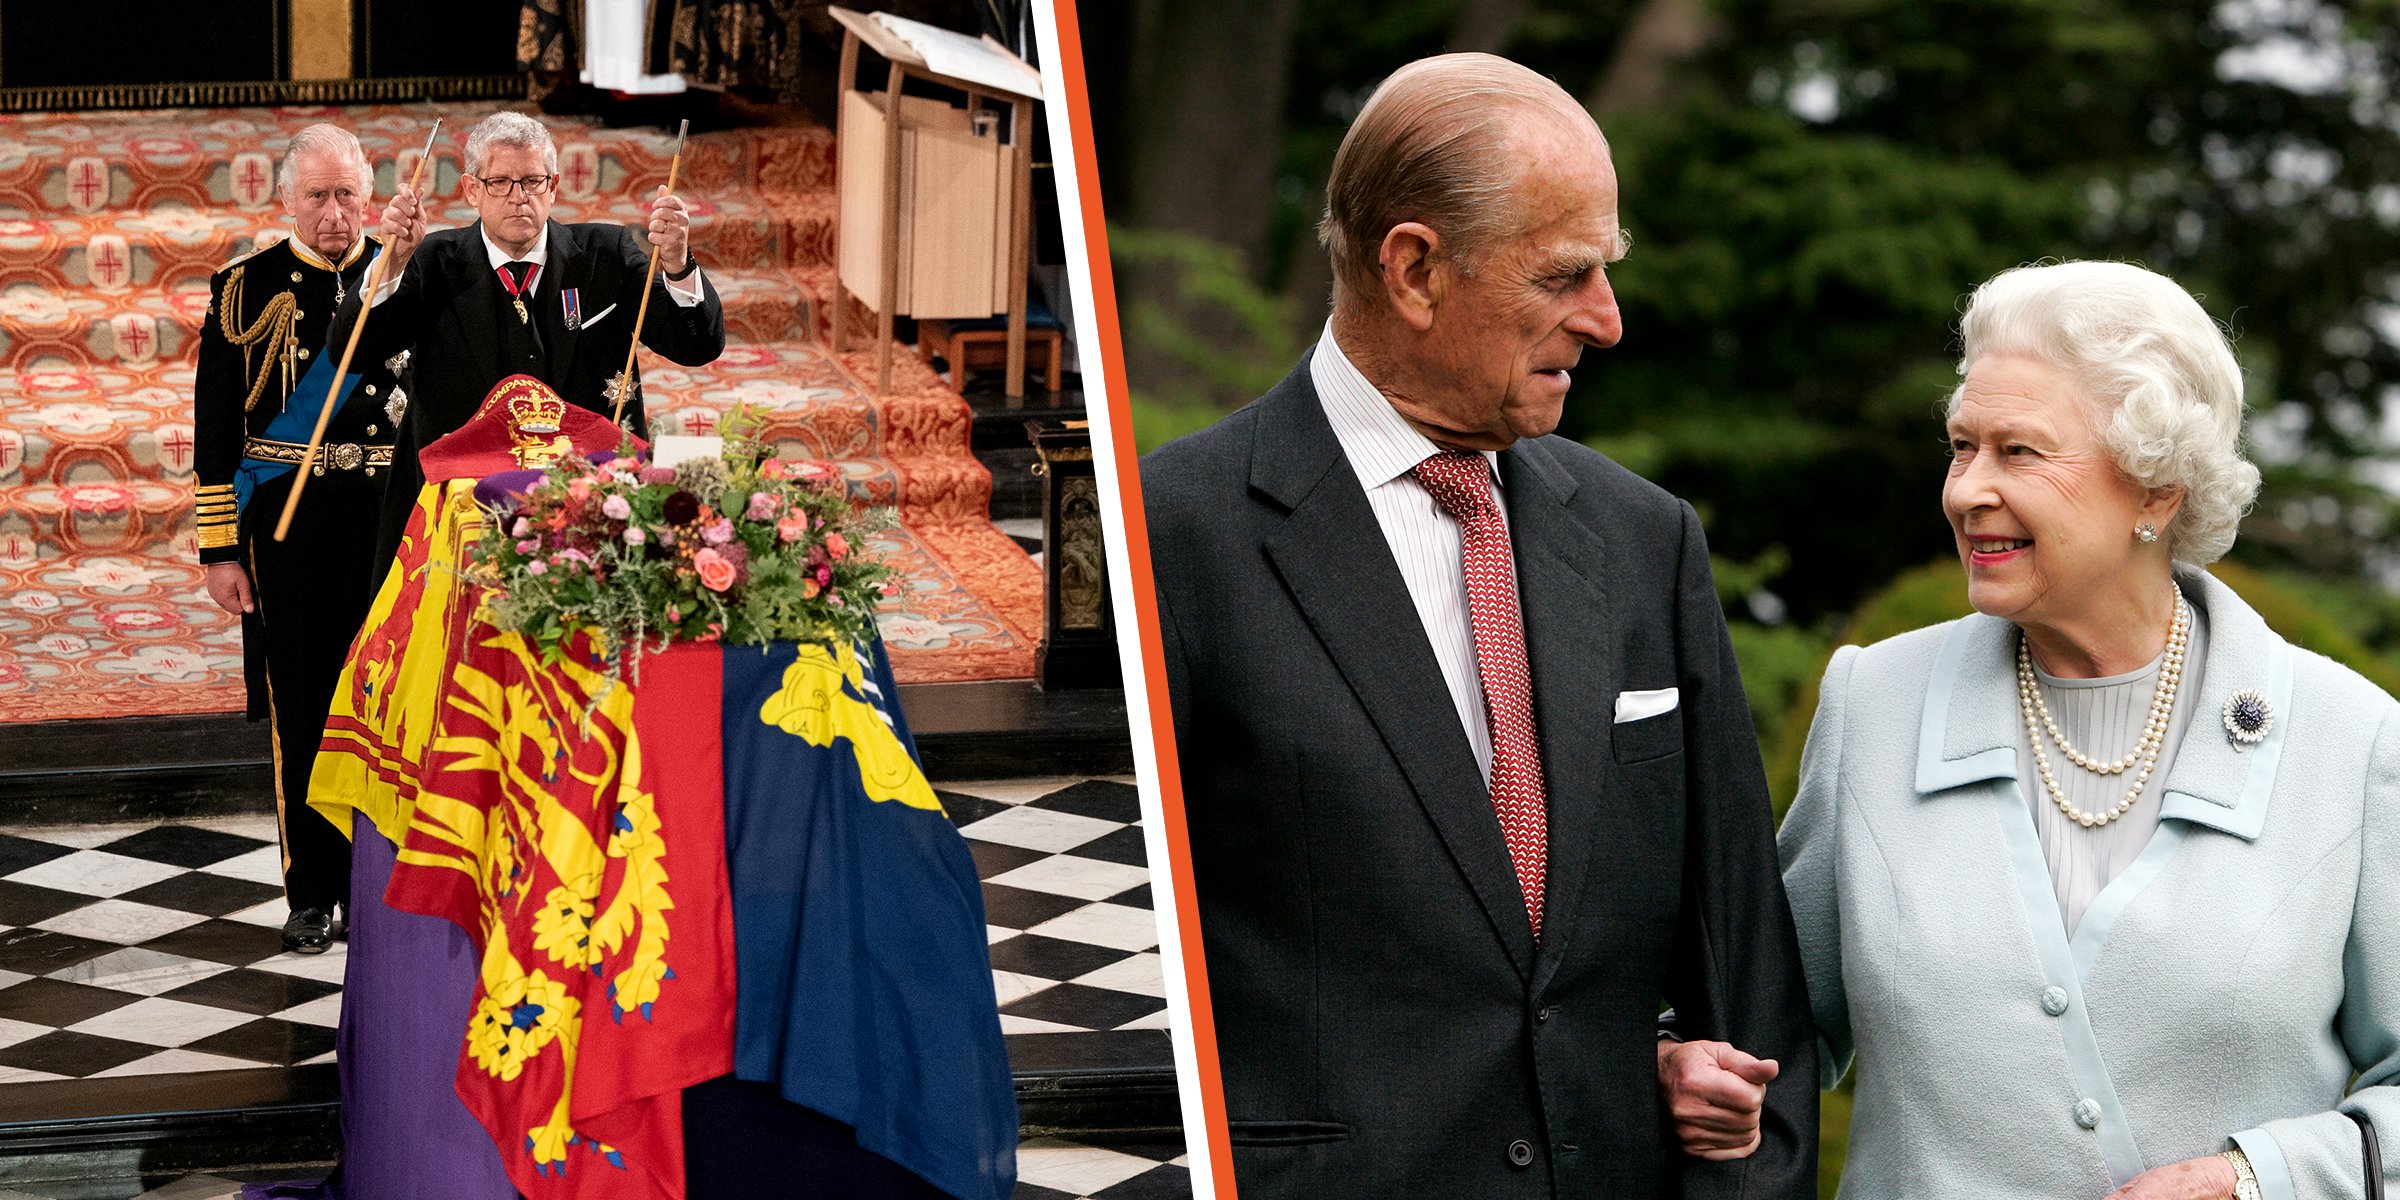 Queen Elizabeth II's Coffin, King Charles III and Lord Chamberlain | Prince Philip and Queen Elizabeth II | Source: Getty Images